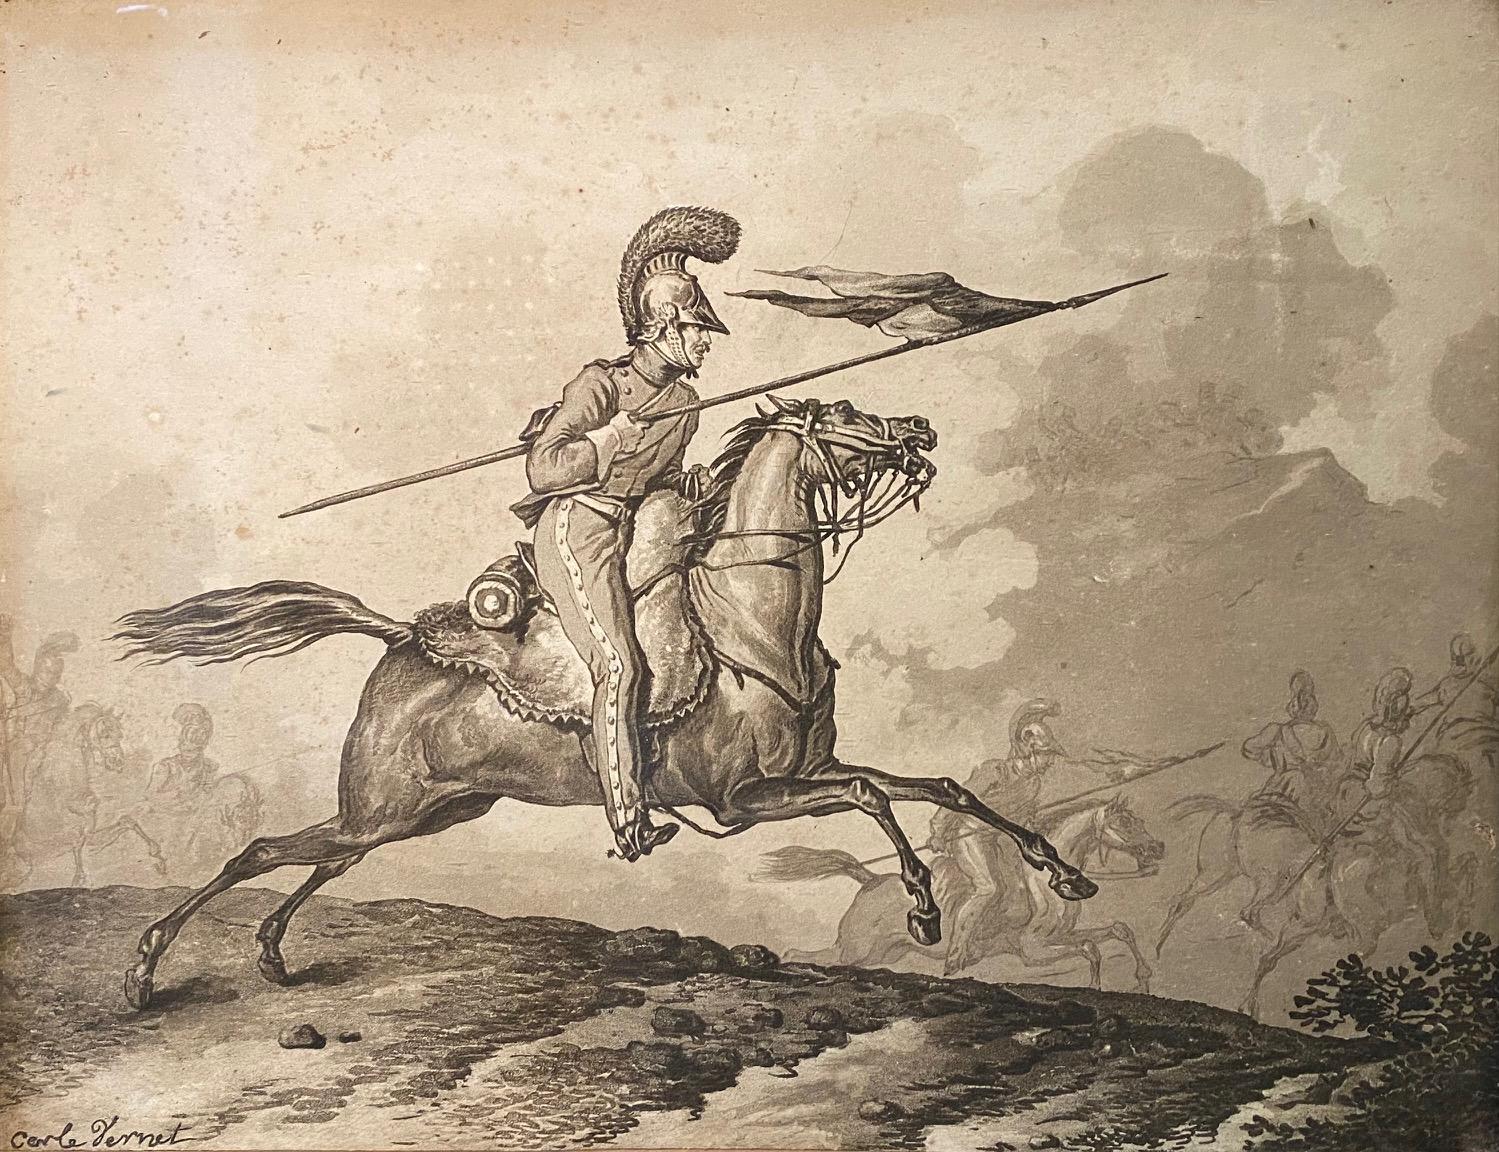 Carle Vernet (Antoine Charles Horace Vernet) Animal Art - Galloping rider by Carle Vernet - Drawing on paper 25x30 cm